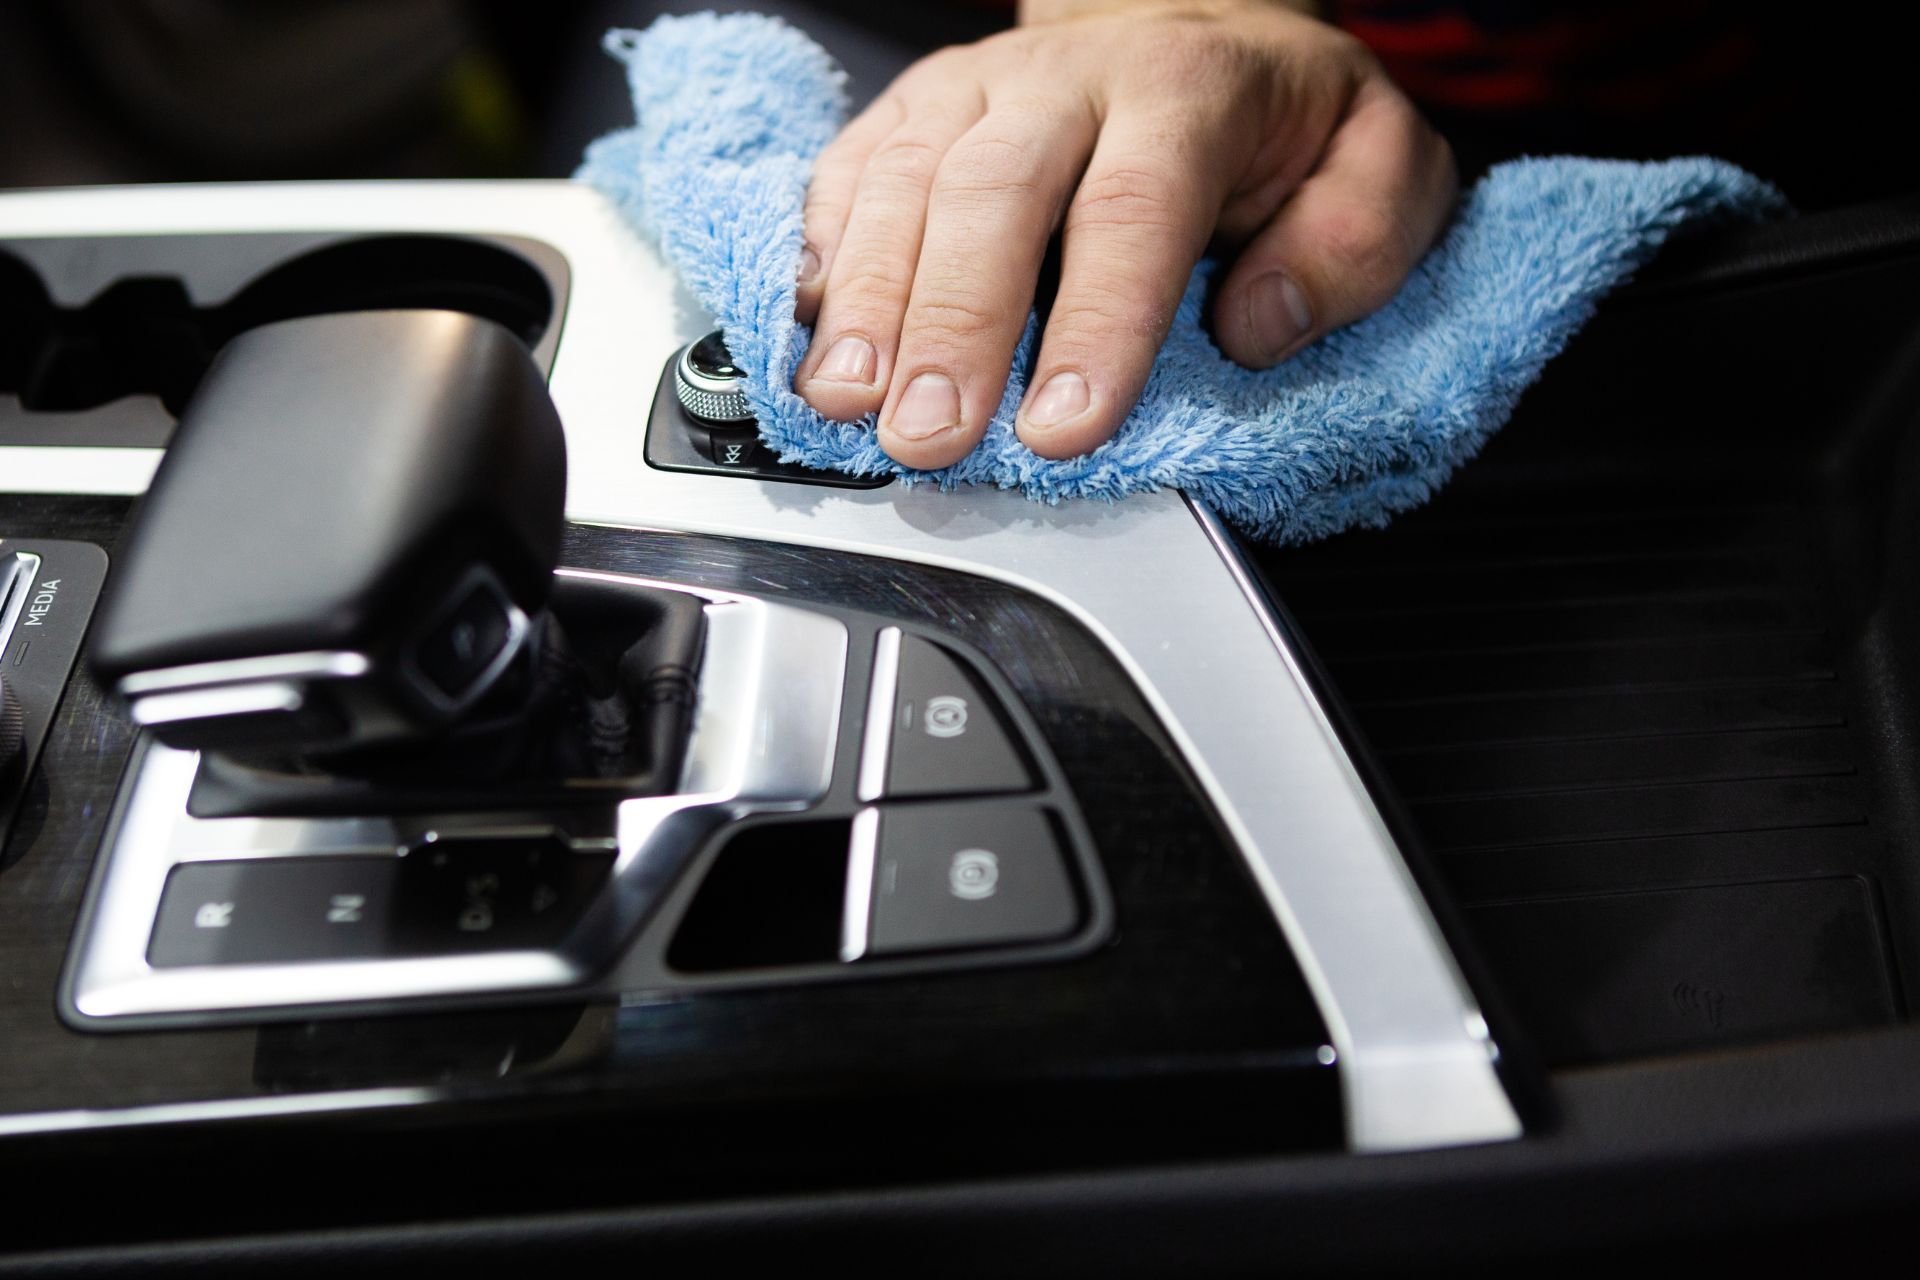 Close-up of a person's hand using a soft blue microfiber cloth to clean the glossy black center console of a car in Duluth, GA. The console includes a modern automatic gear shifter and various control buttons with metallic trim, reflecting meticulous auto detailing that enhances the vehicle's interior appearance.